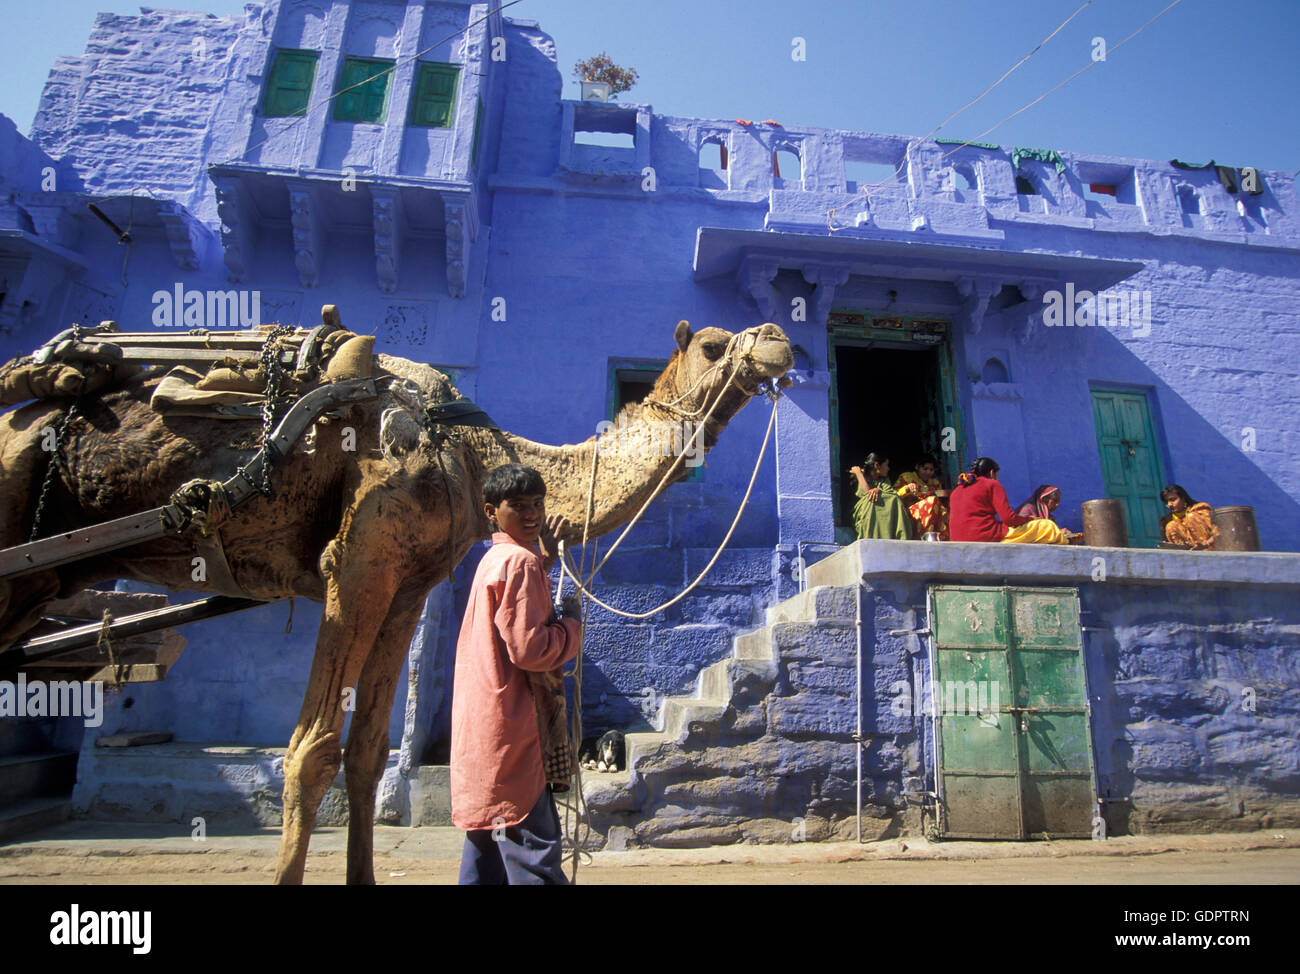 the blue city in the old town of Jodhpur in Rajasthan in India. Stock Photo